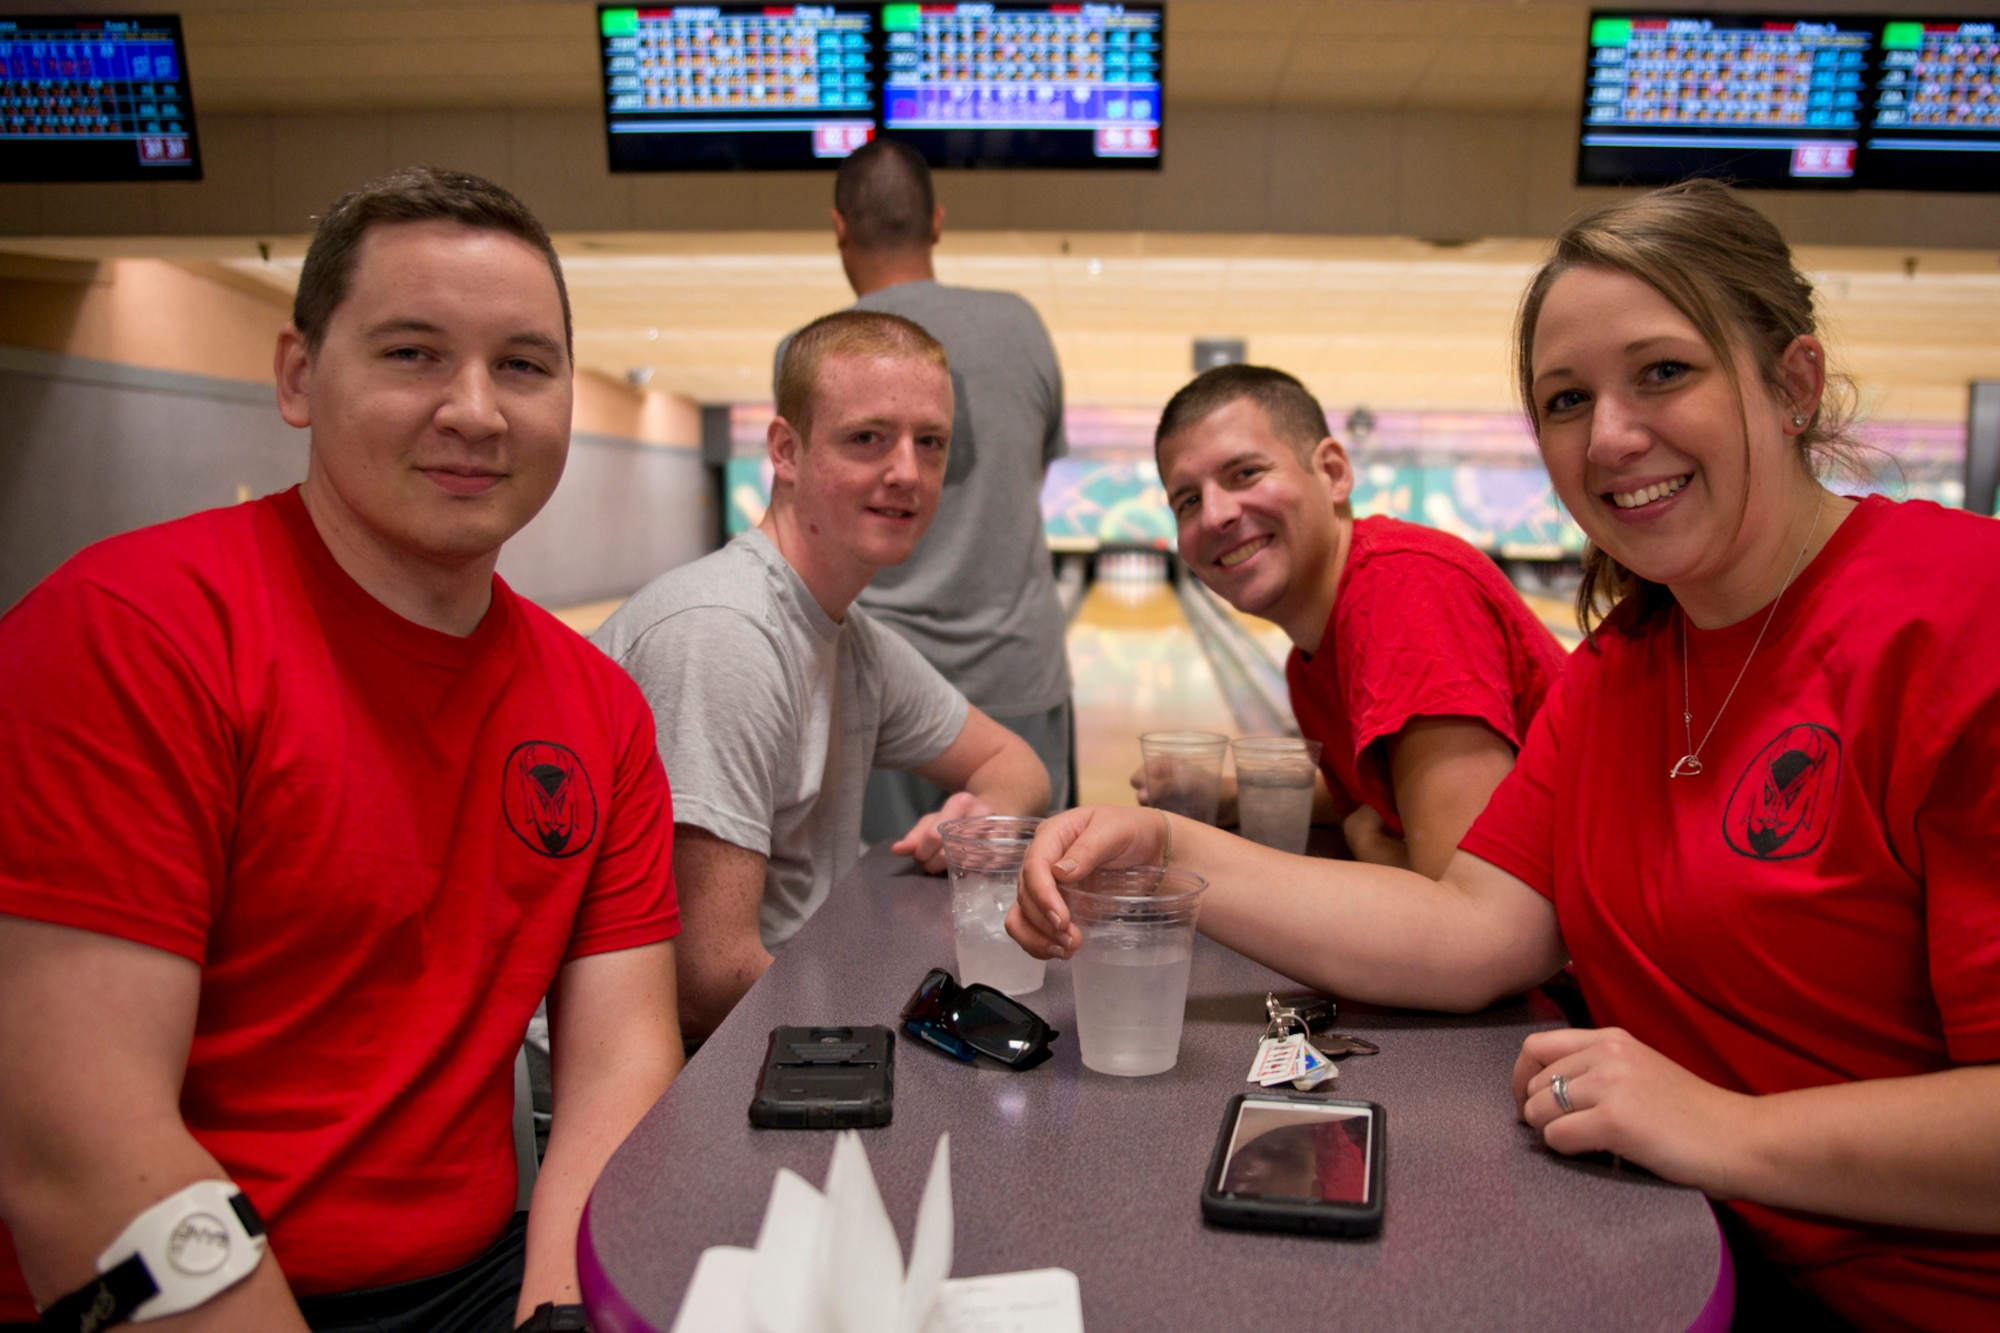 From left, U.S. Air Force Senior Airmen Anthony Szeluga, 50th Airlift Squadron, loadmaster, Corey Wright, 61st Airlift Squadron, loadmaster, Steven Bargmann, 50th AS, crew chief; and Tiffany Raimes, 50th AS, loadmaster, pose for a photo after a bowling tournament Oct. 8, 2015, where Szeluga bowled a perfect game at Little Rock Air Force Base, Ark. The final score for the 4-person team was 821, enough to take first place in the Session 1 Bowling Tournament of the Sports Day event on Little Rock AFB. (U.S. Air Force photo by Master Sgt. Jeff Walston/Released)